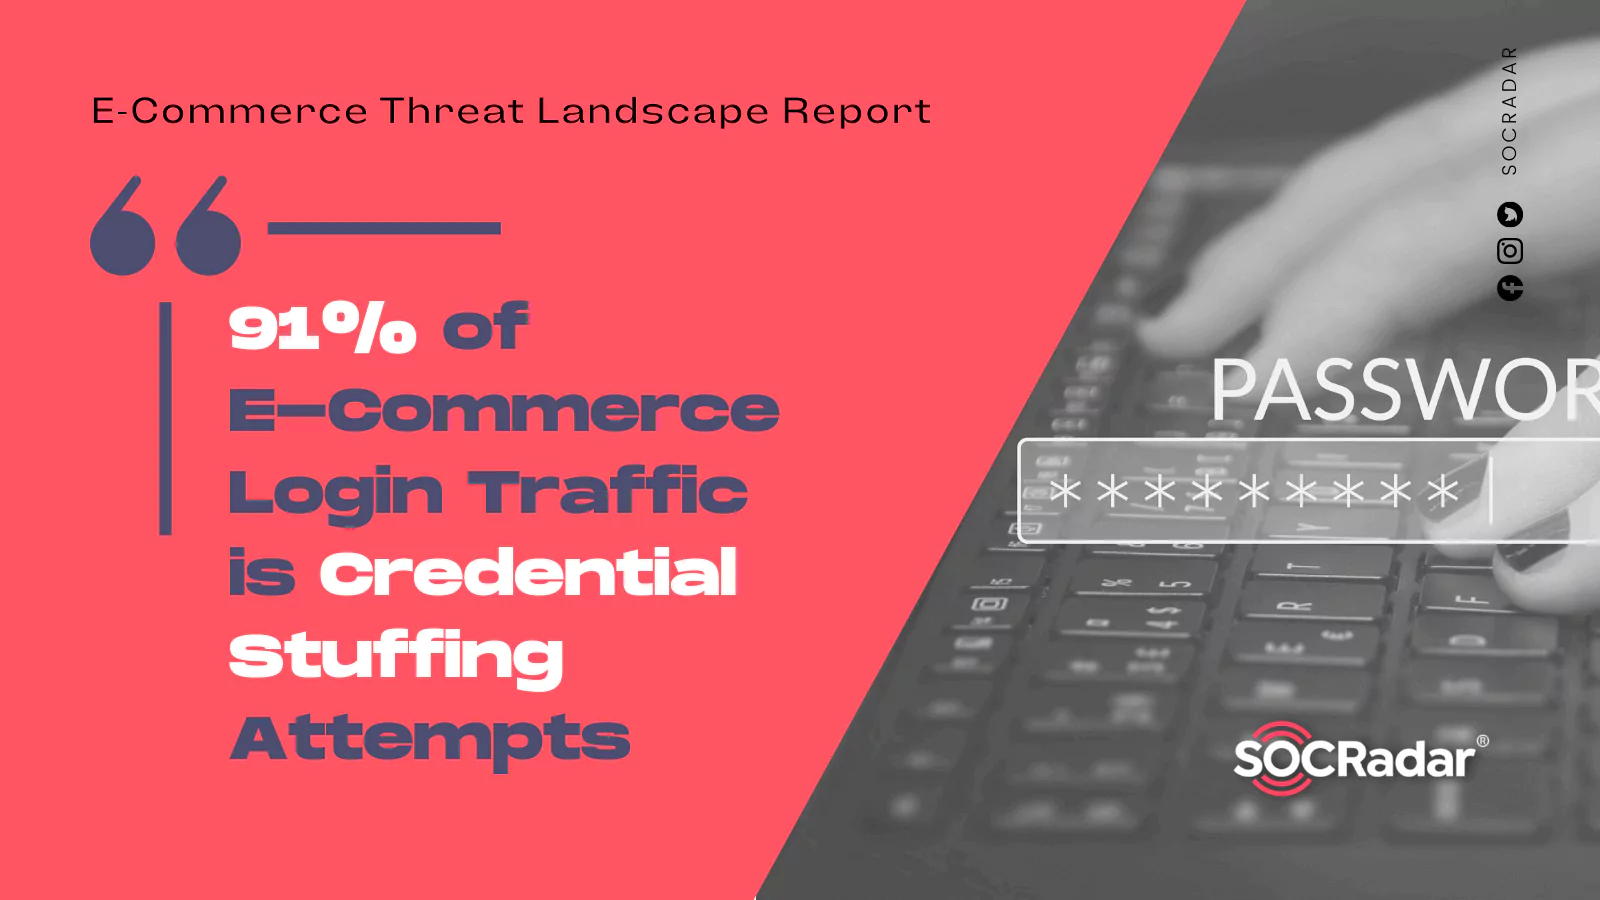 SOCRadar® Cyber Intelligence Inc. | 91% of E-Commerce Login Traffic is Credential Stuffing Attempts